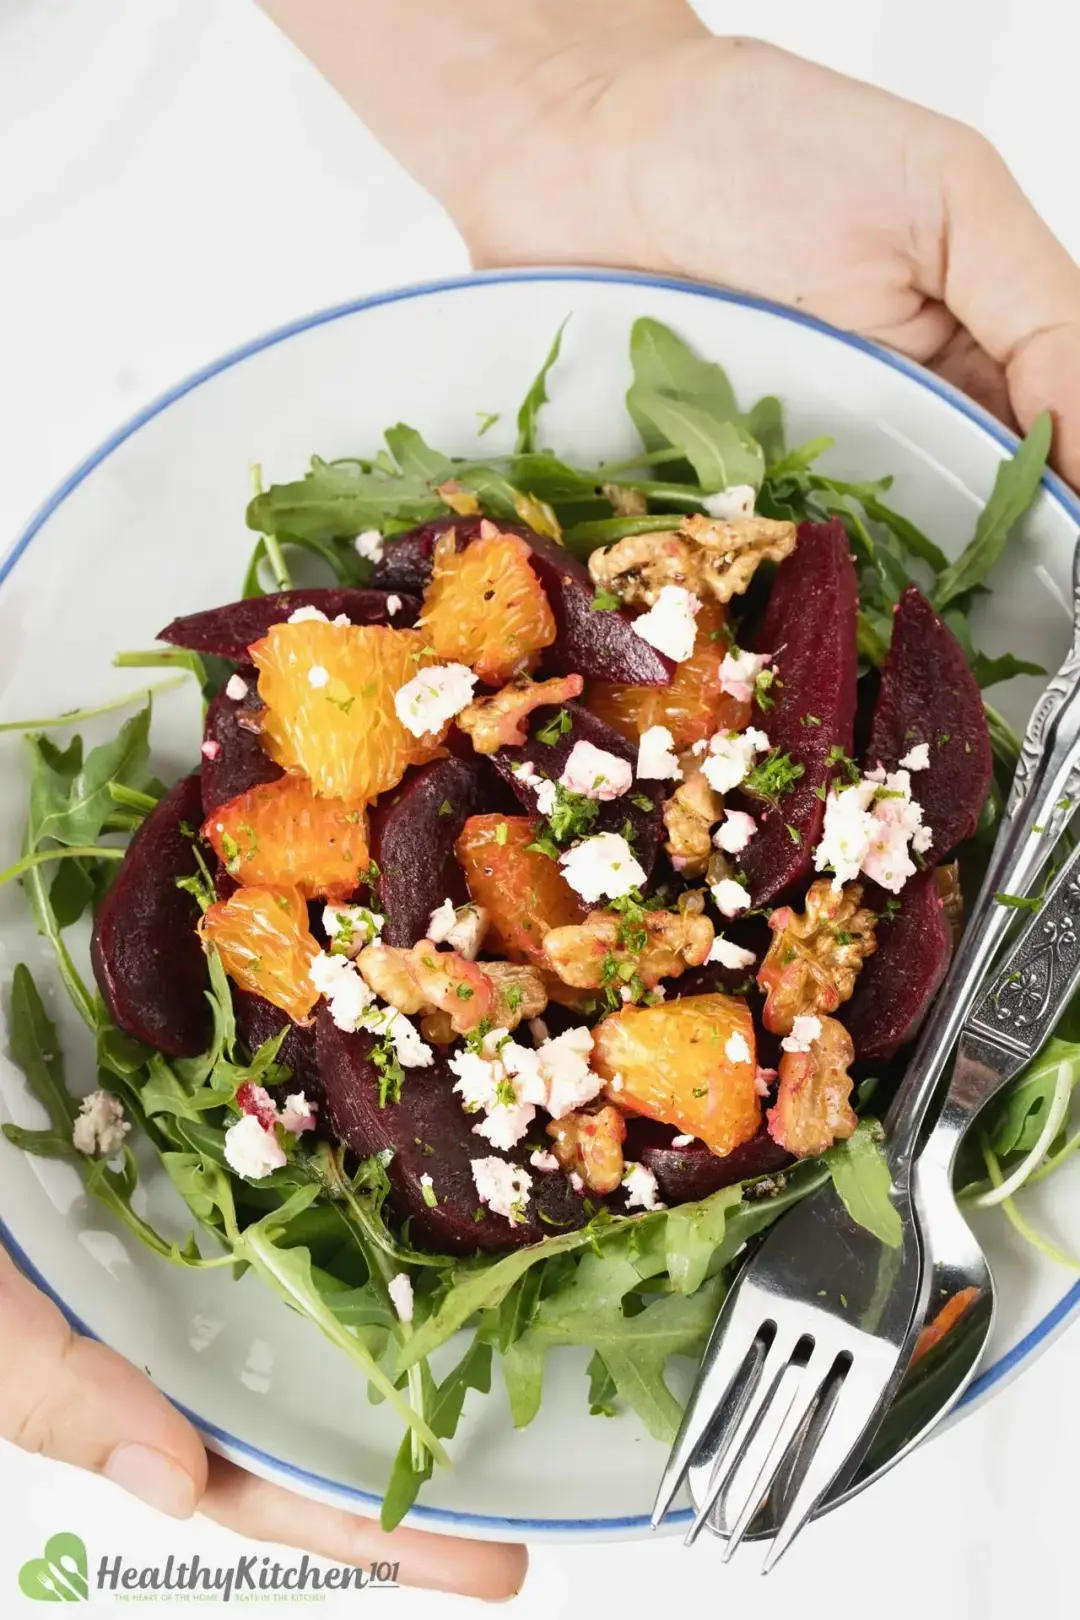 A close-up of a beet and feta cheese salad with greens, orange, and walnuts.